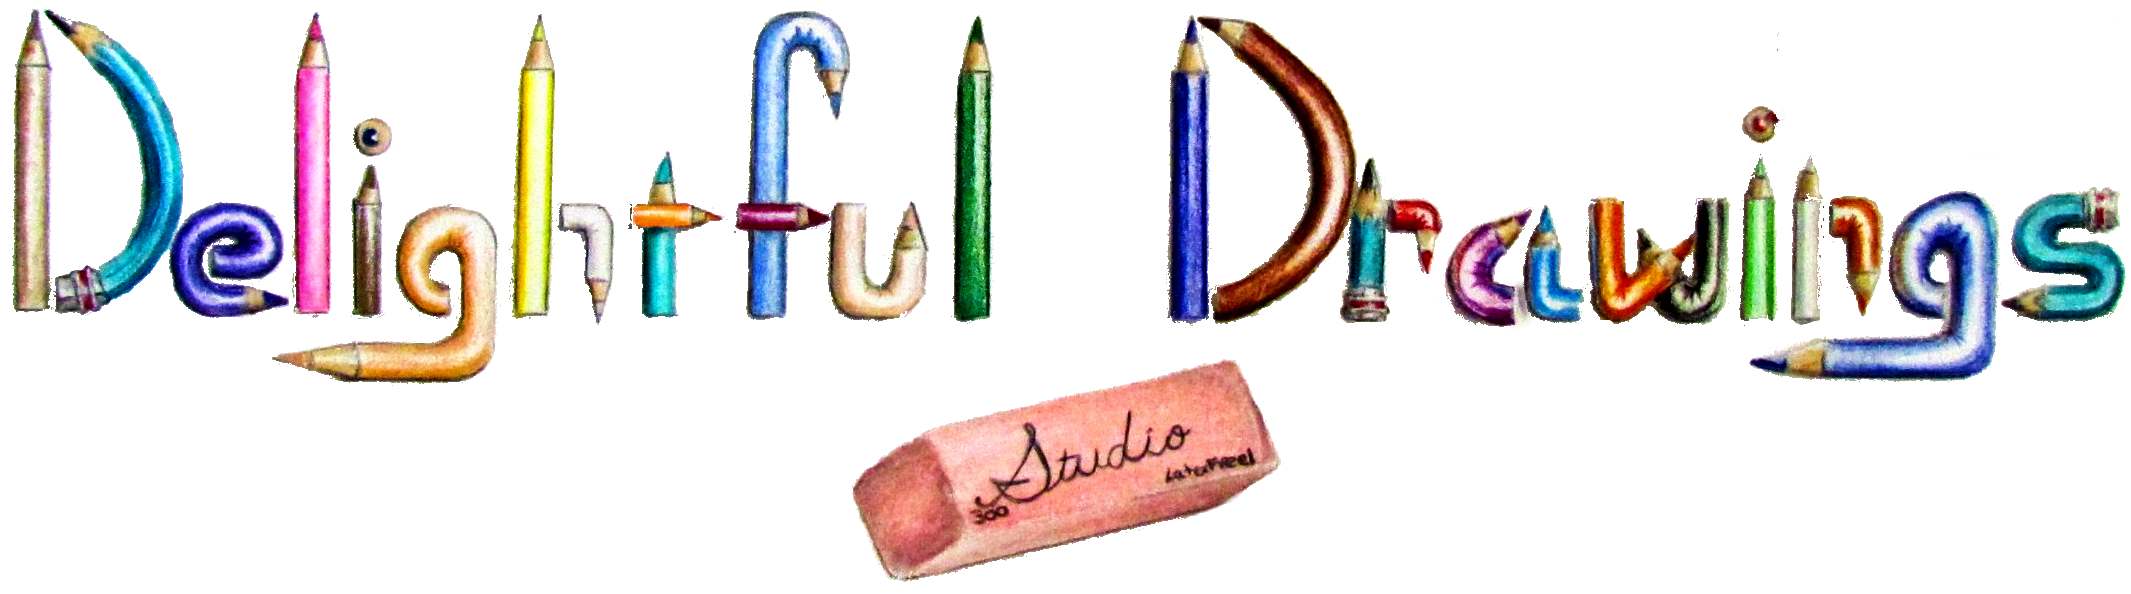 Drawing of colored pencils that spell out Delightful Drawings Studio.